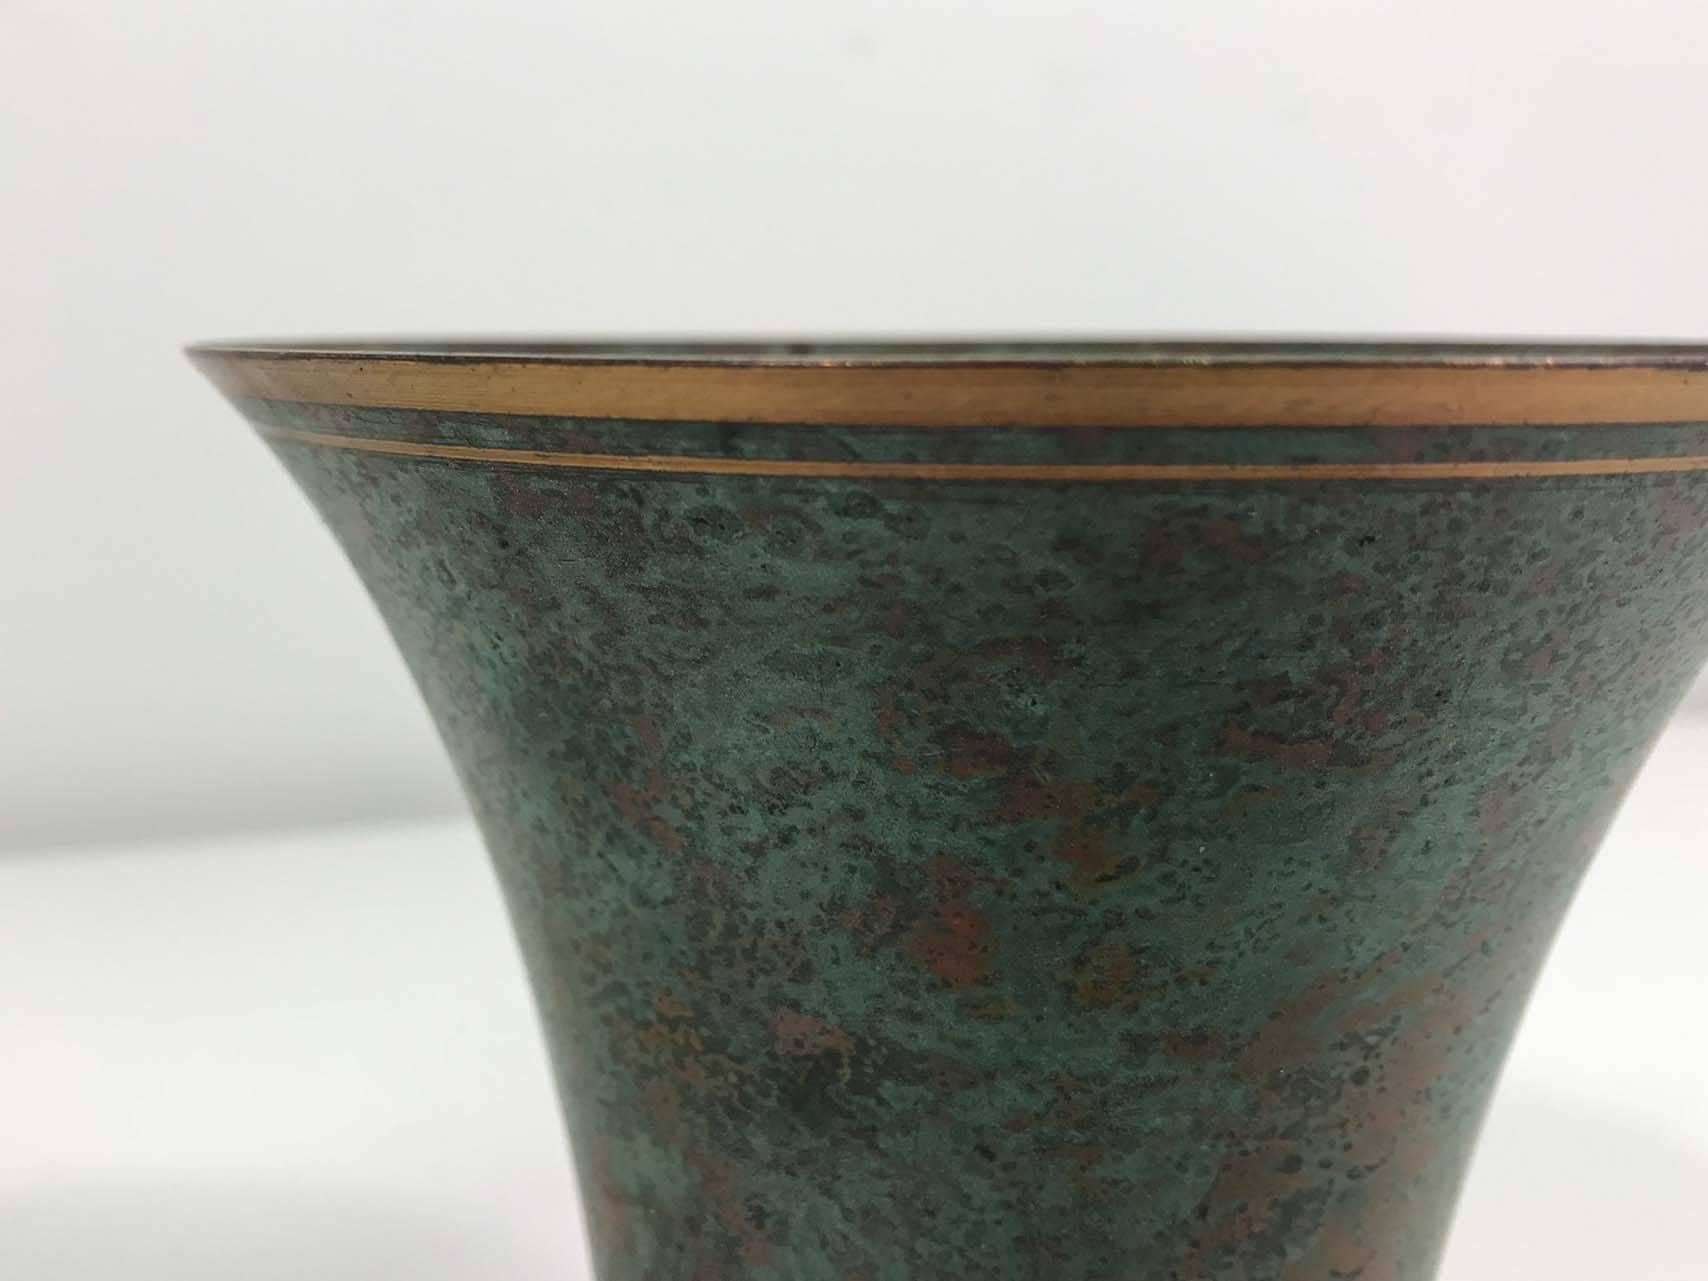 Art Deco bronze vase by Carl Sorensen. Wonderful original condition with minor wear consistent with age and use. Signed at bottom.